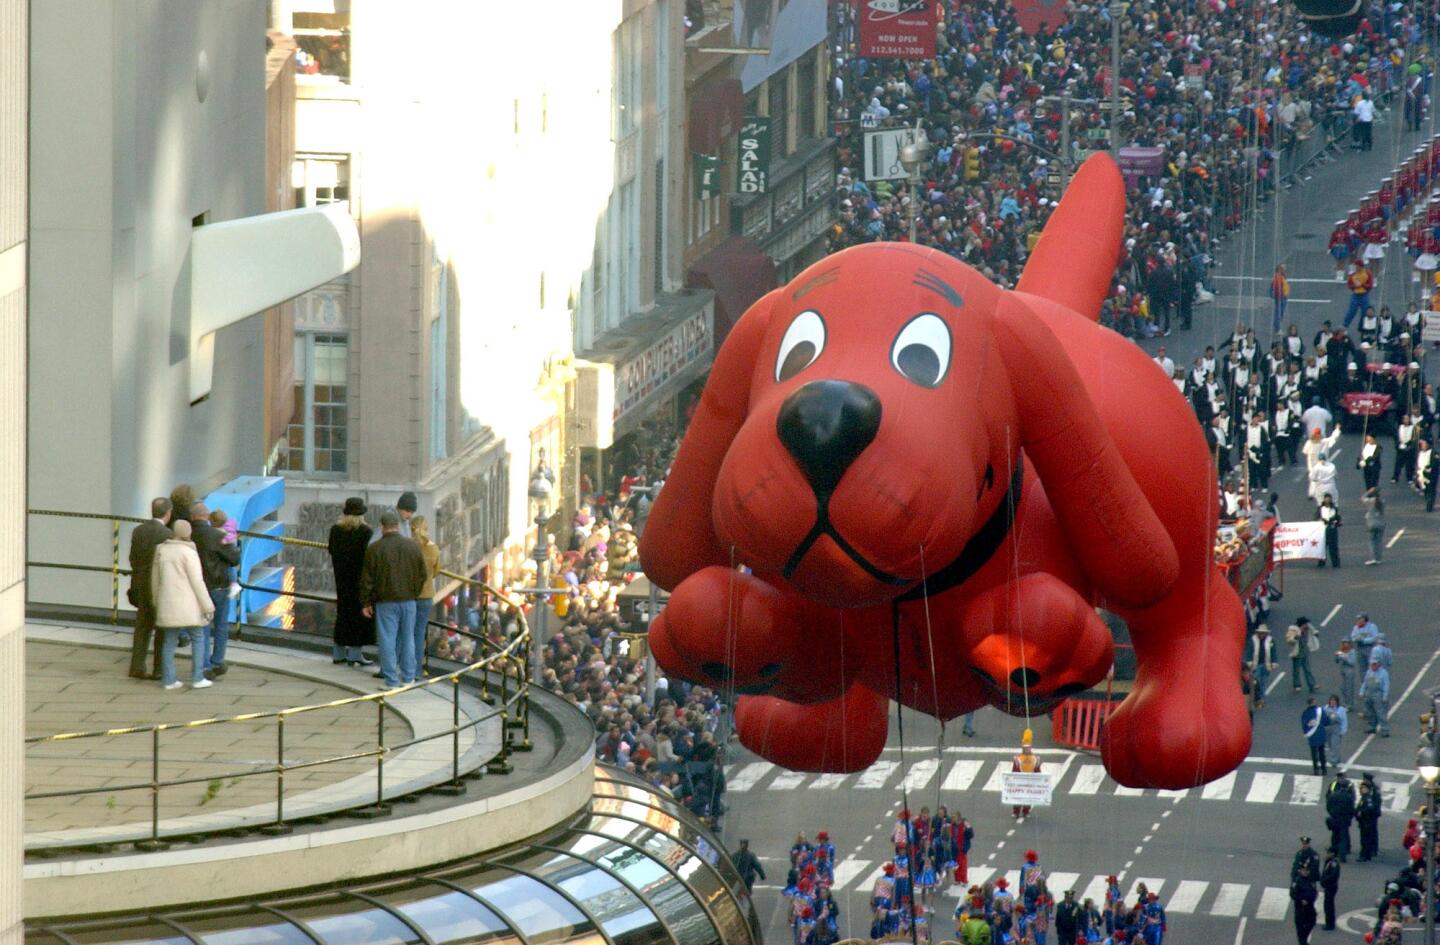 The Clifford the Big Red Dog balloon floats in the Macy's Thanksgiving Day parade in 2003.